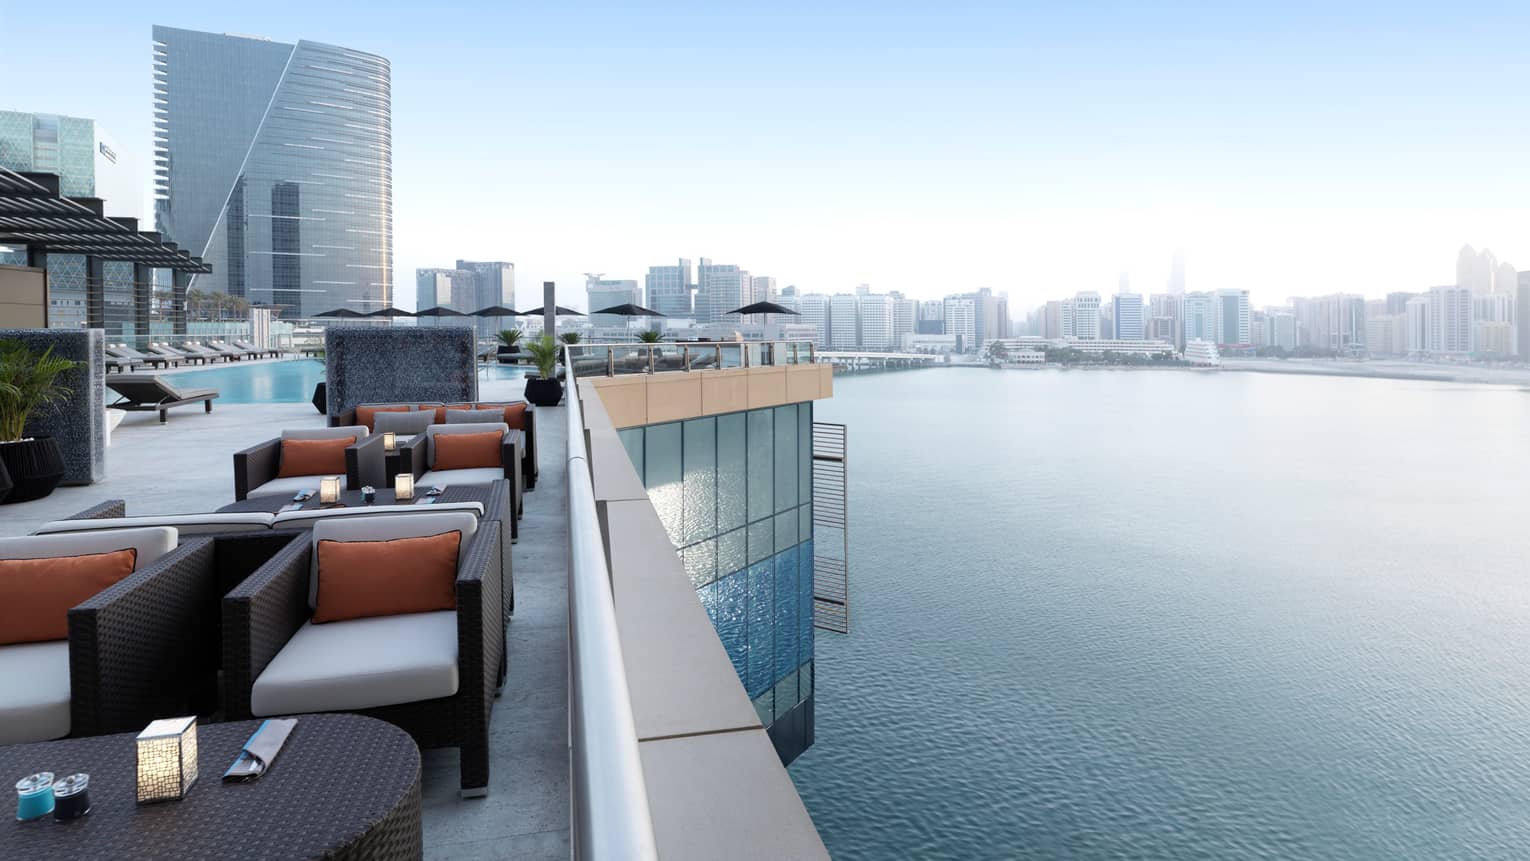 Rooftop lounge with stylish black wicker armchairs, cushions, candles on tables, swimming pool, overlooking Arabian Gulf